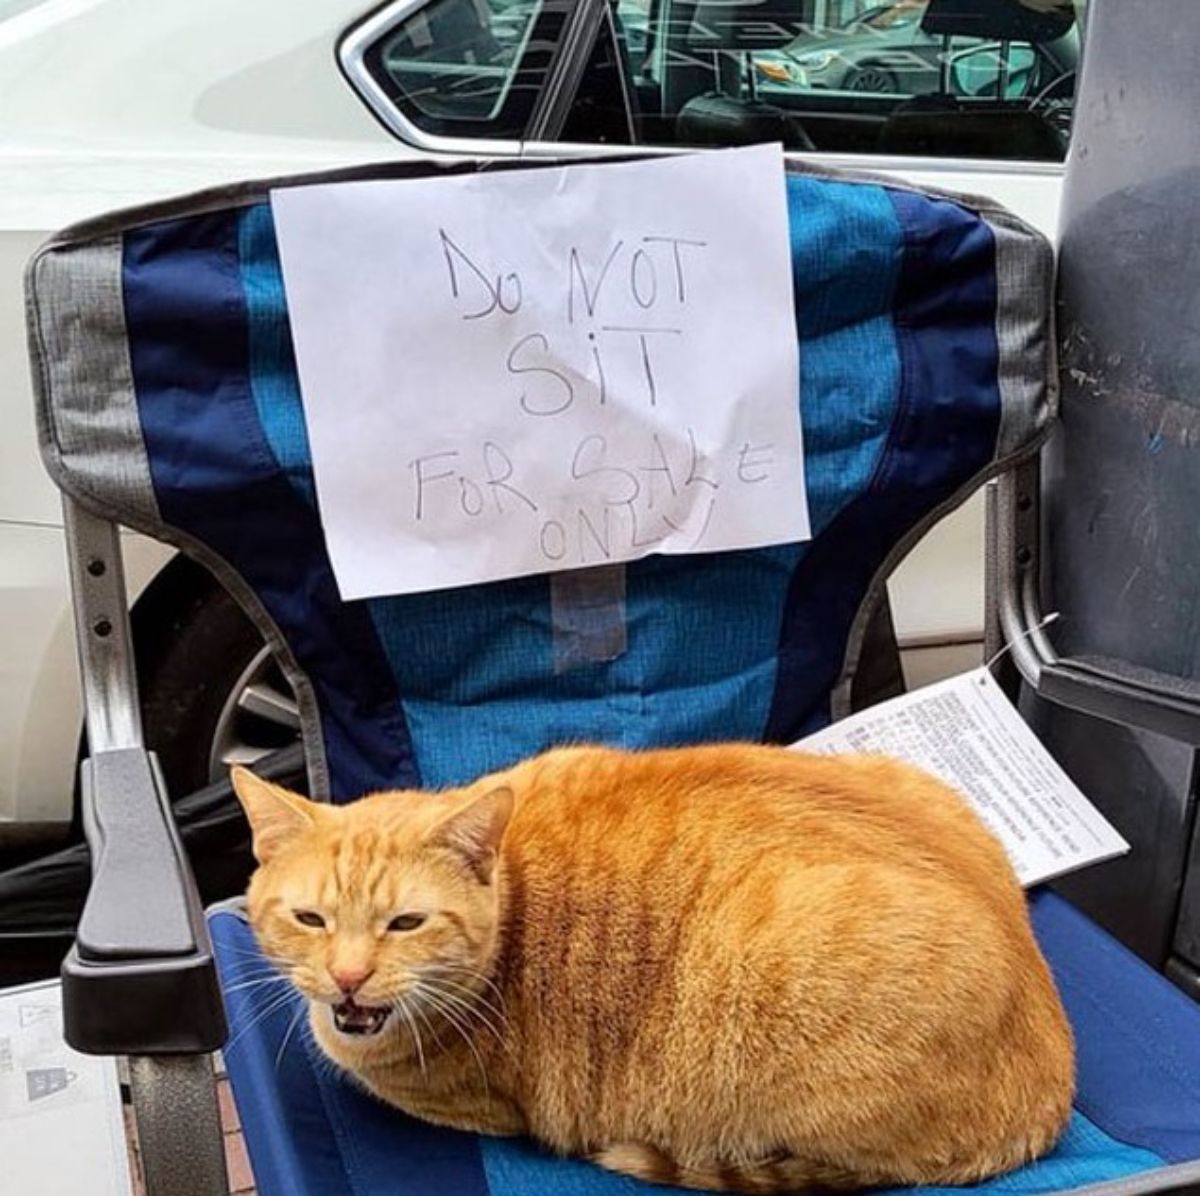 hissing orange cat sitting on a black green and grey chair with a sign saying DO NO SIT FOR SALE ONLY